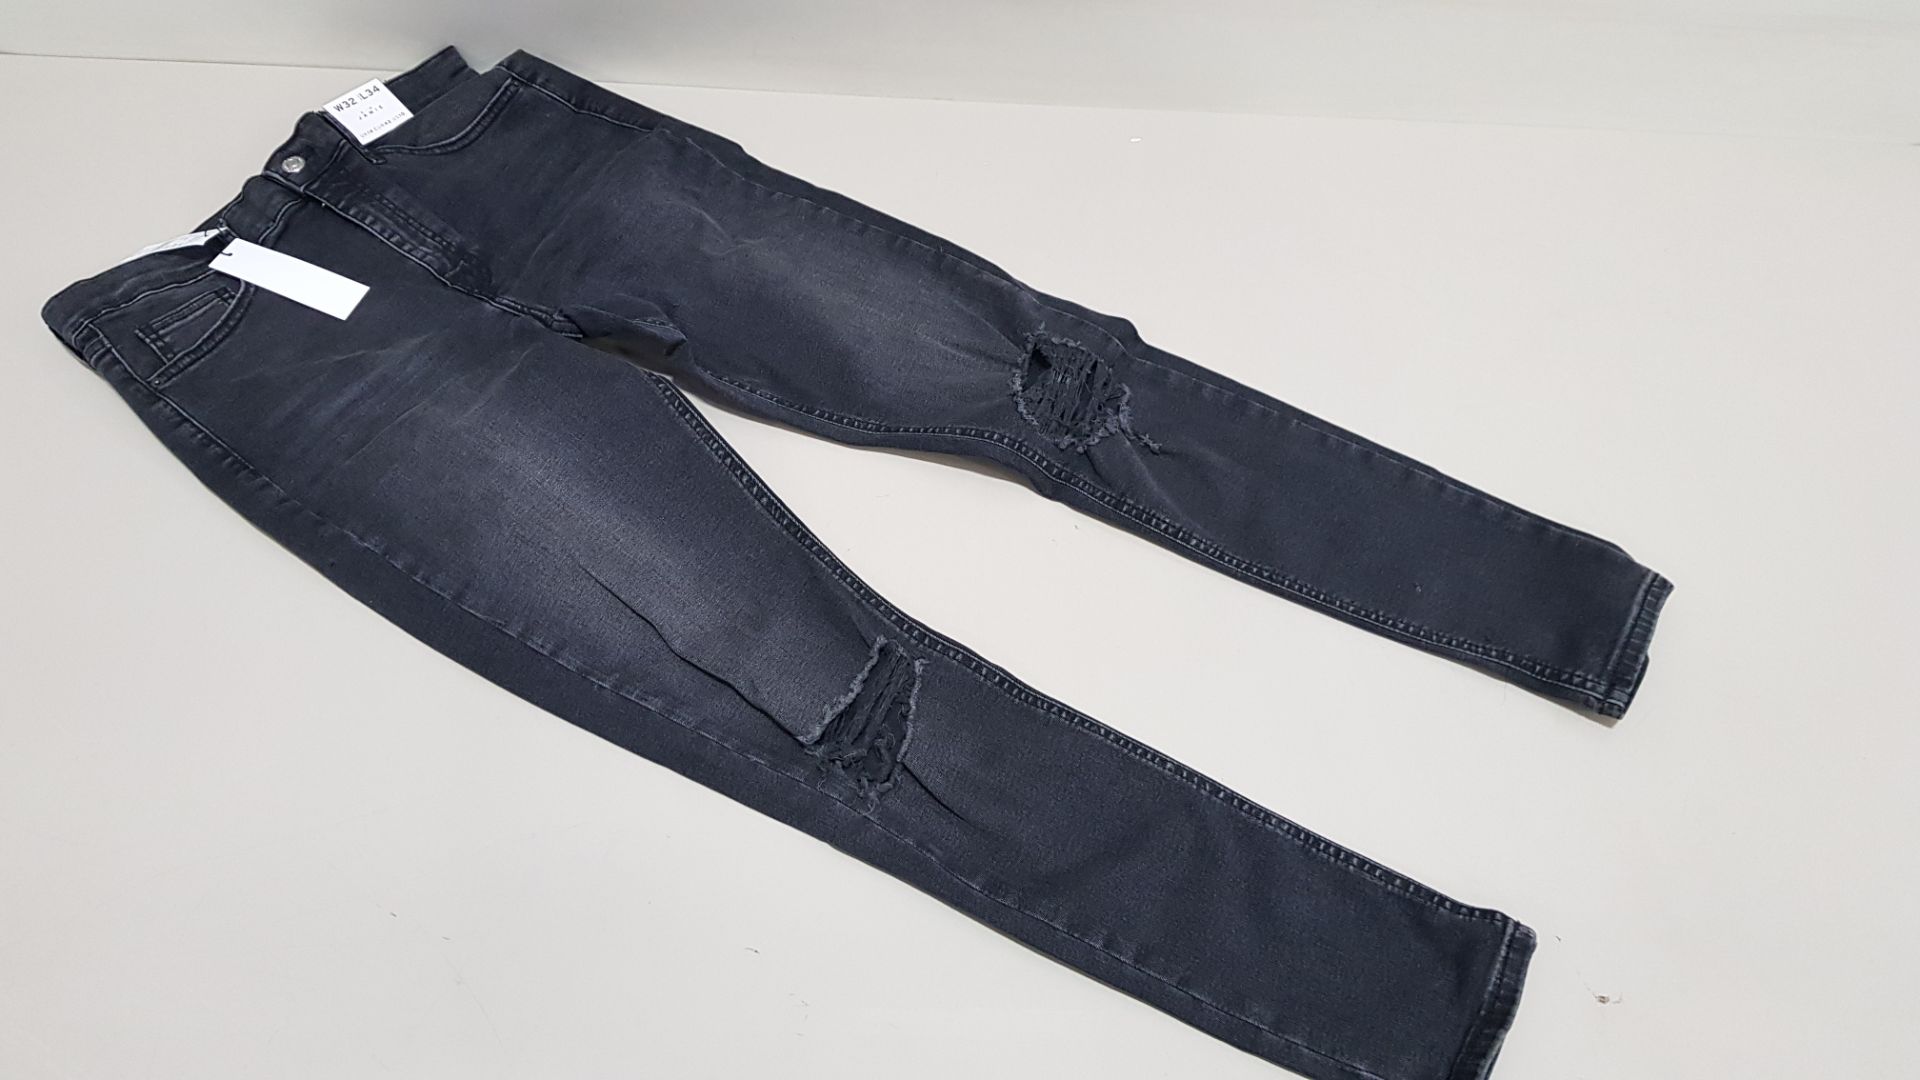 10 X BRAND NEW TOPSHOP JAMIE JEANS UK SIZE 10 AND 14 RRP £42.00 (TOTAL RRP £420.00)